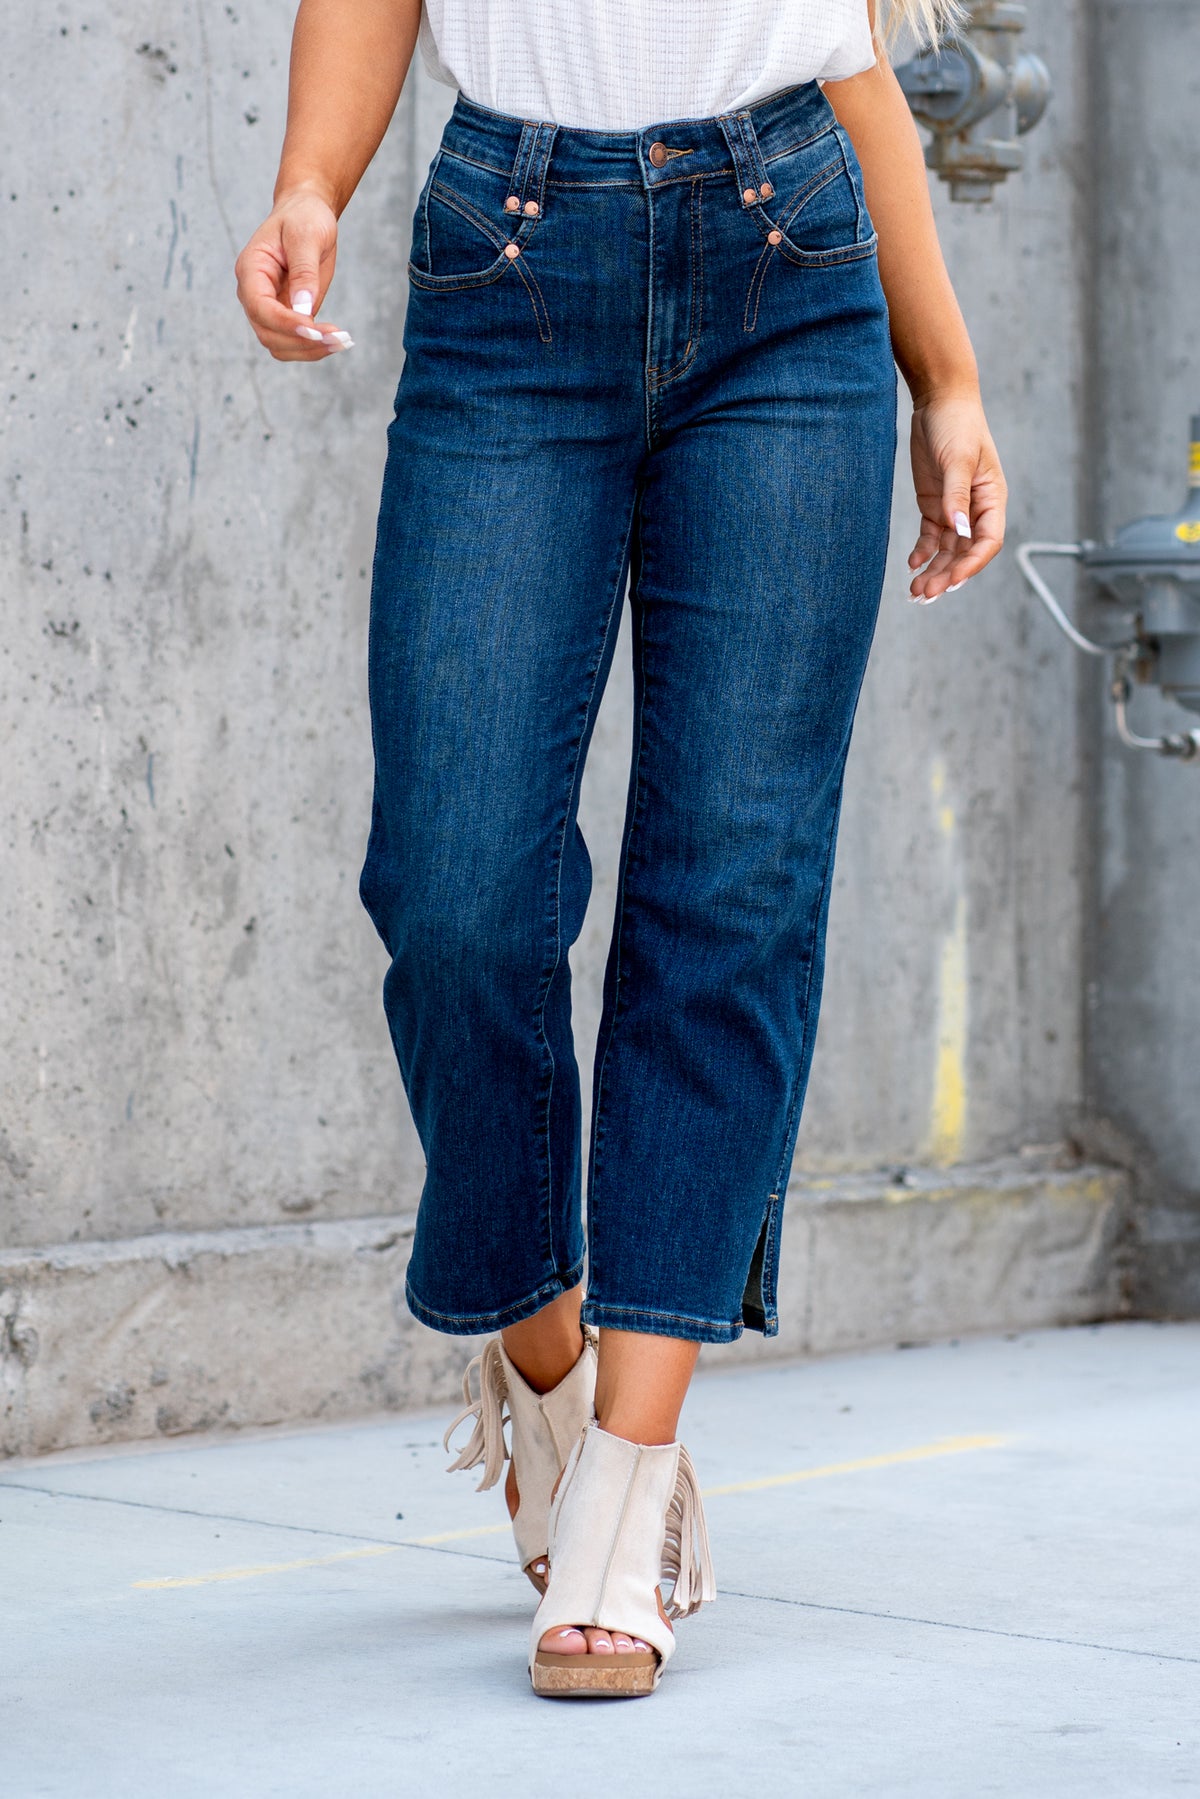 Judy blue jeans review! Im wearing a 14w and am usually a size 16! #ju